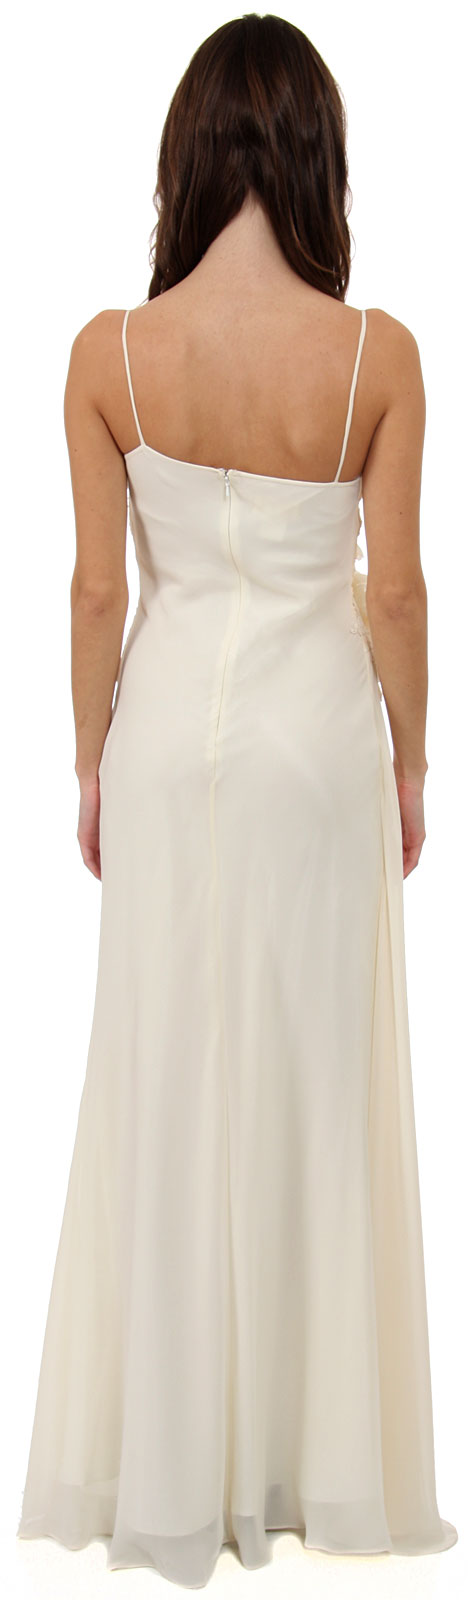 Back image of Asymmetric Top Floral And Sheered Wedding Dress